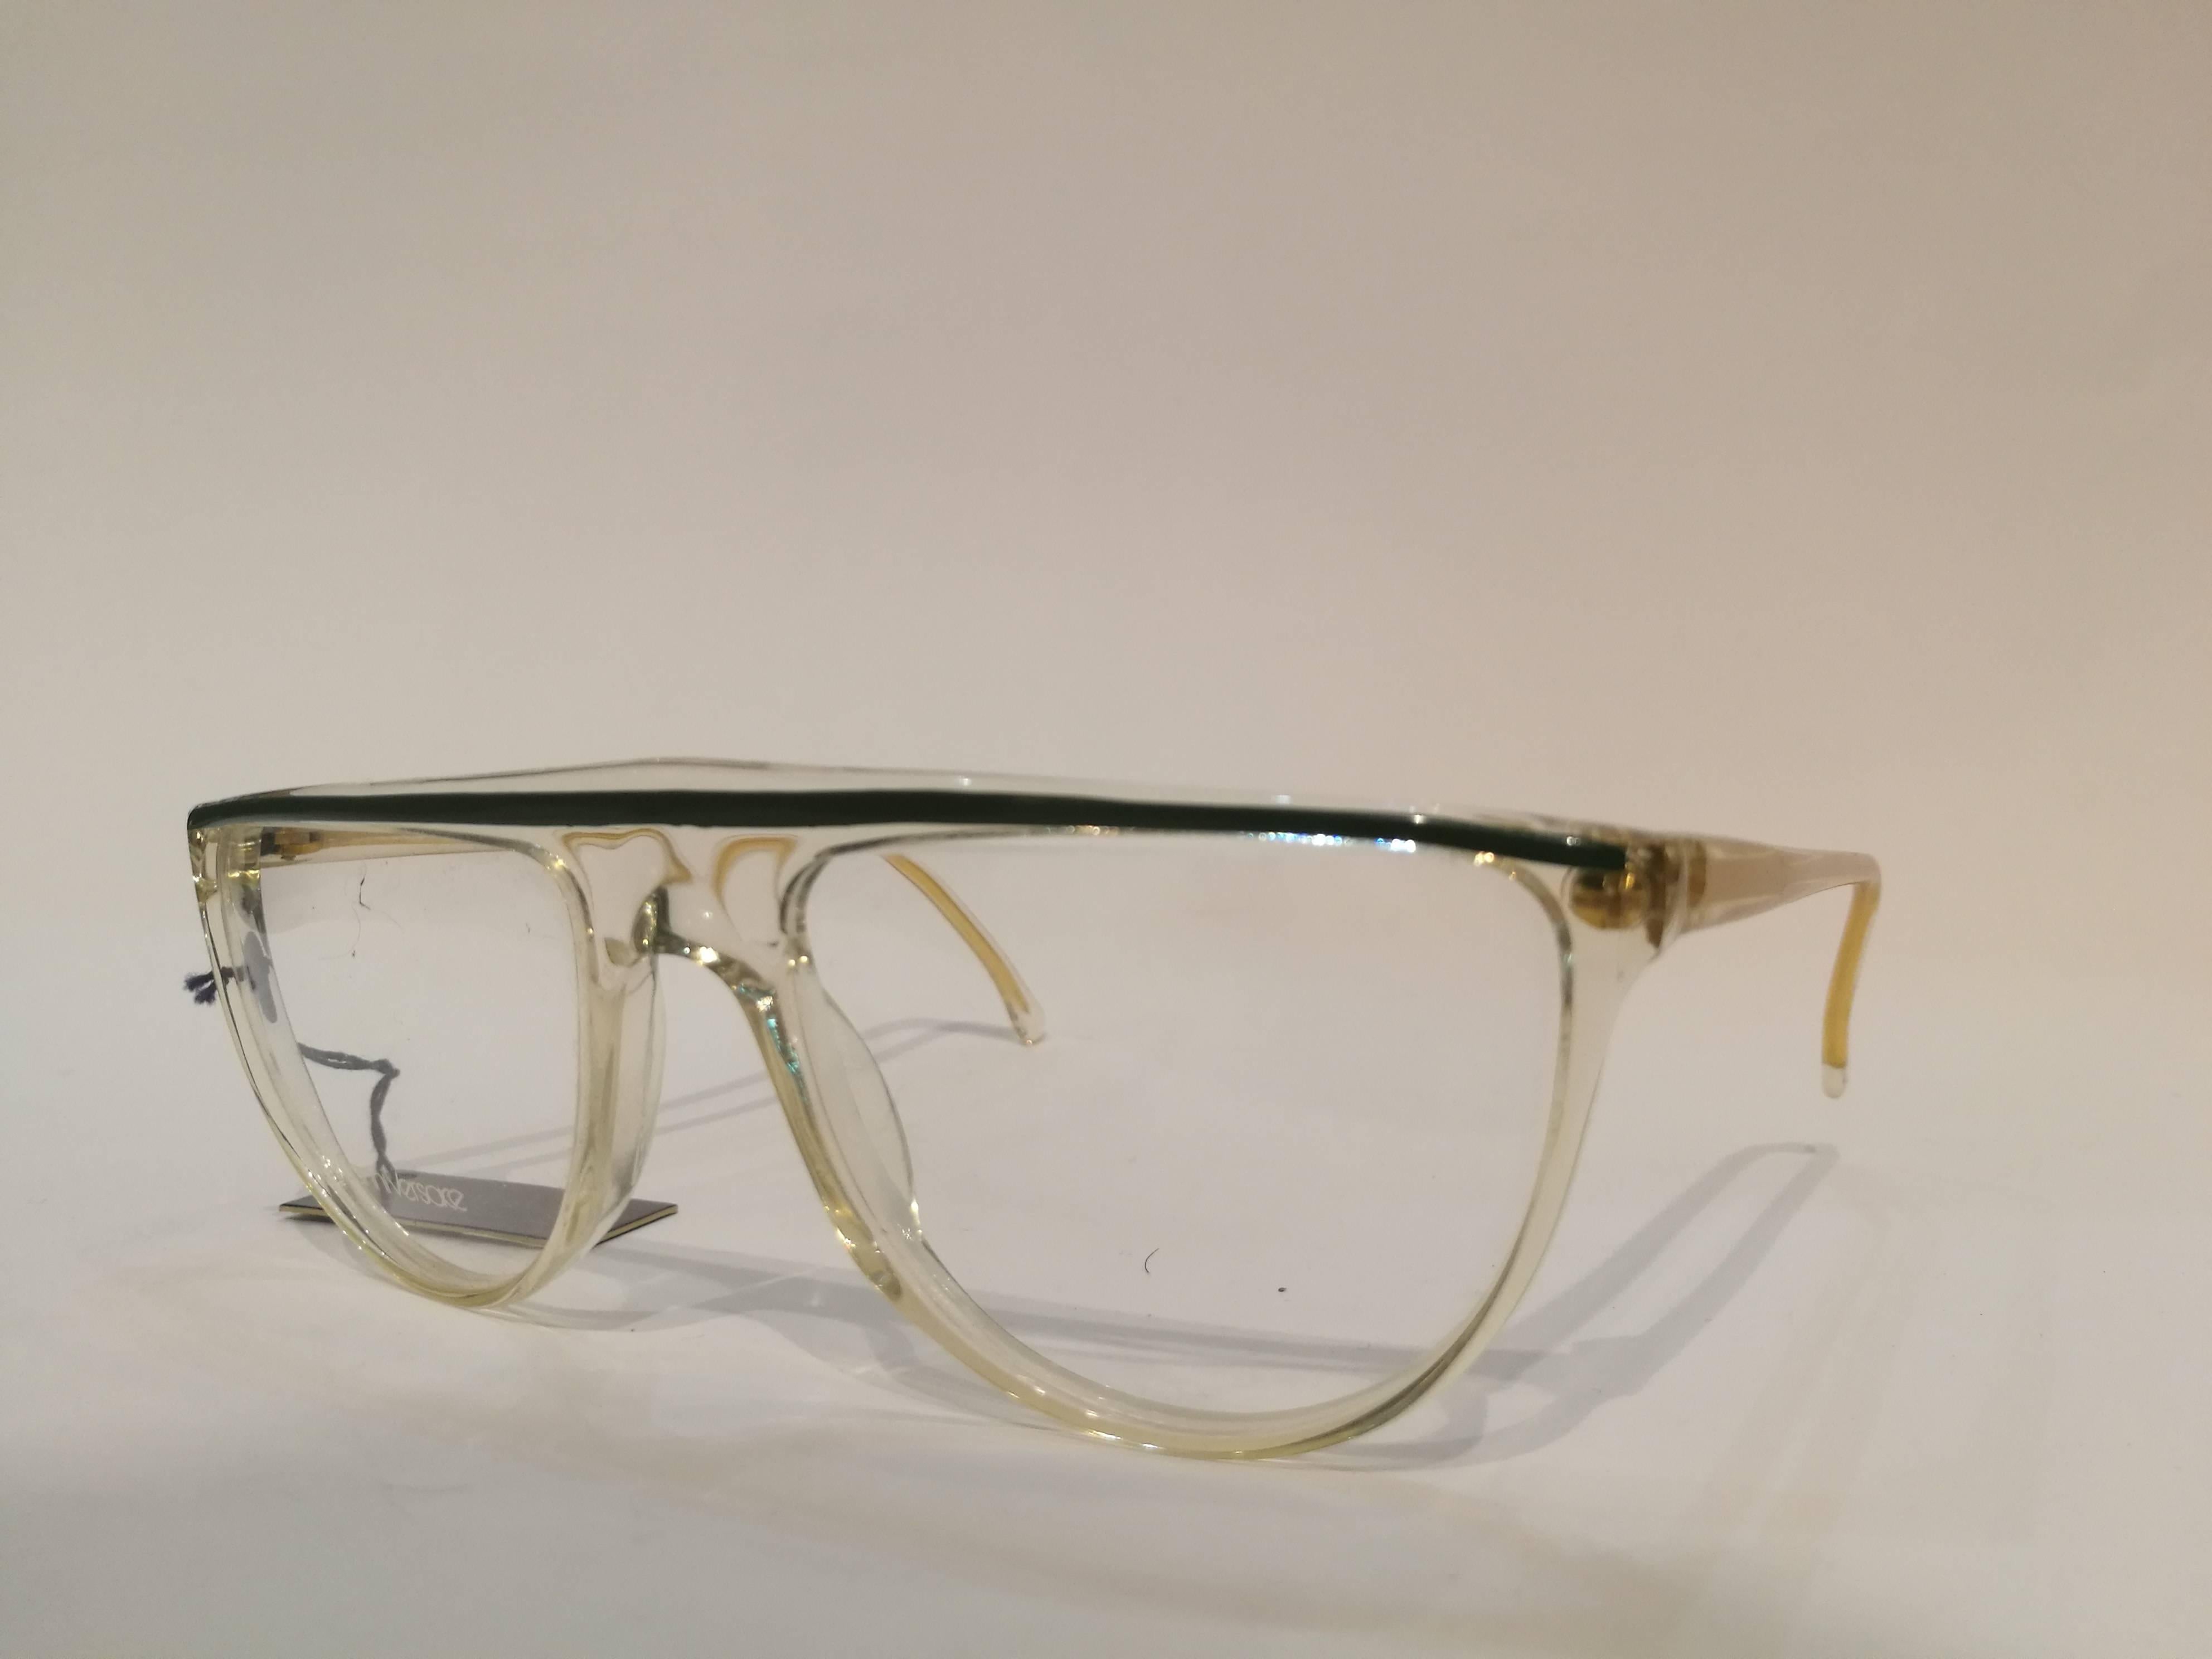 Gianni Versace Frames from the 90ies still with tags and totally made in italy